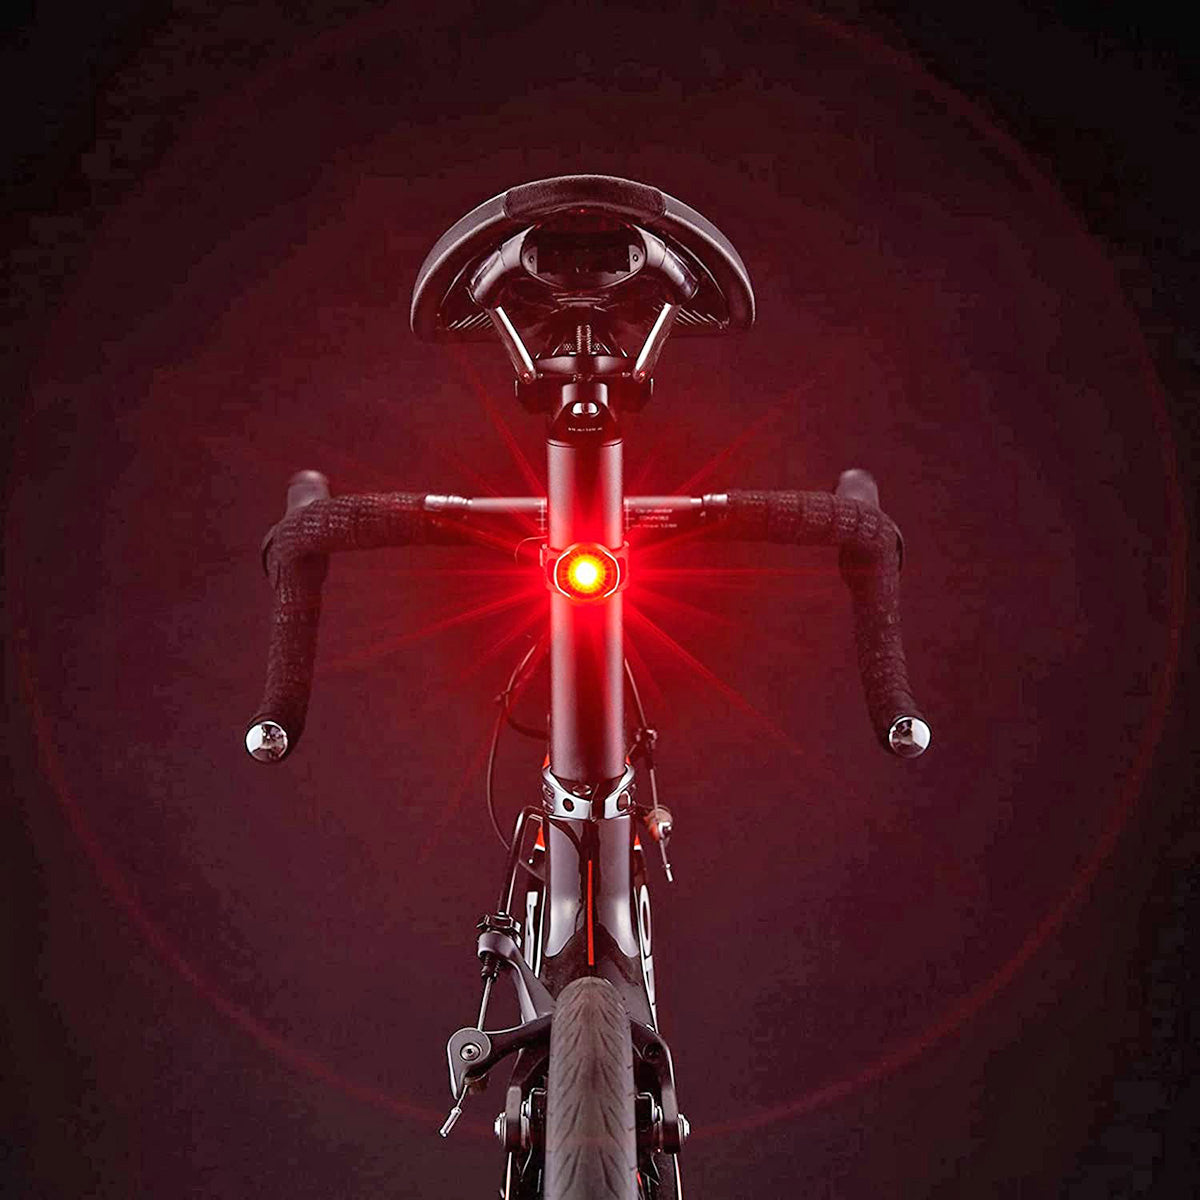 CatEye Orb Rechargeable Rear Bicycle Light - SL-LD160RC-R CatEye